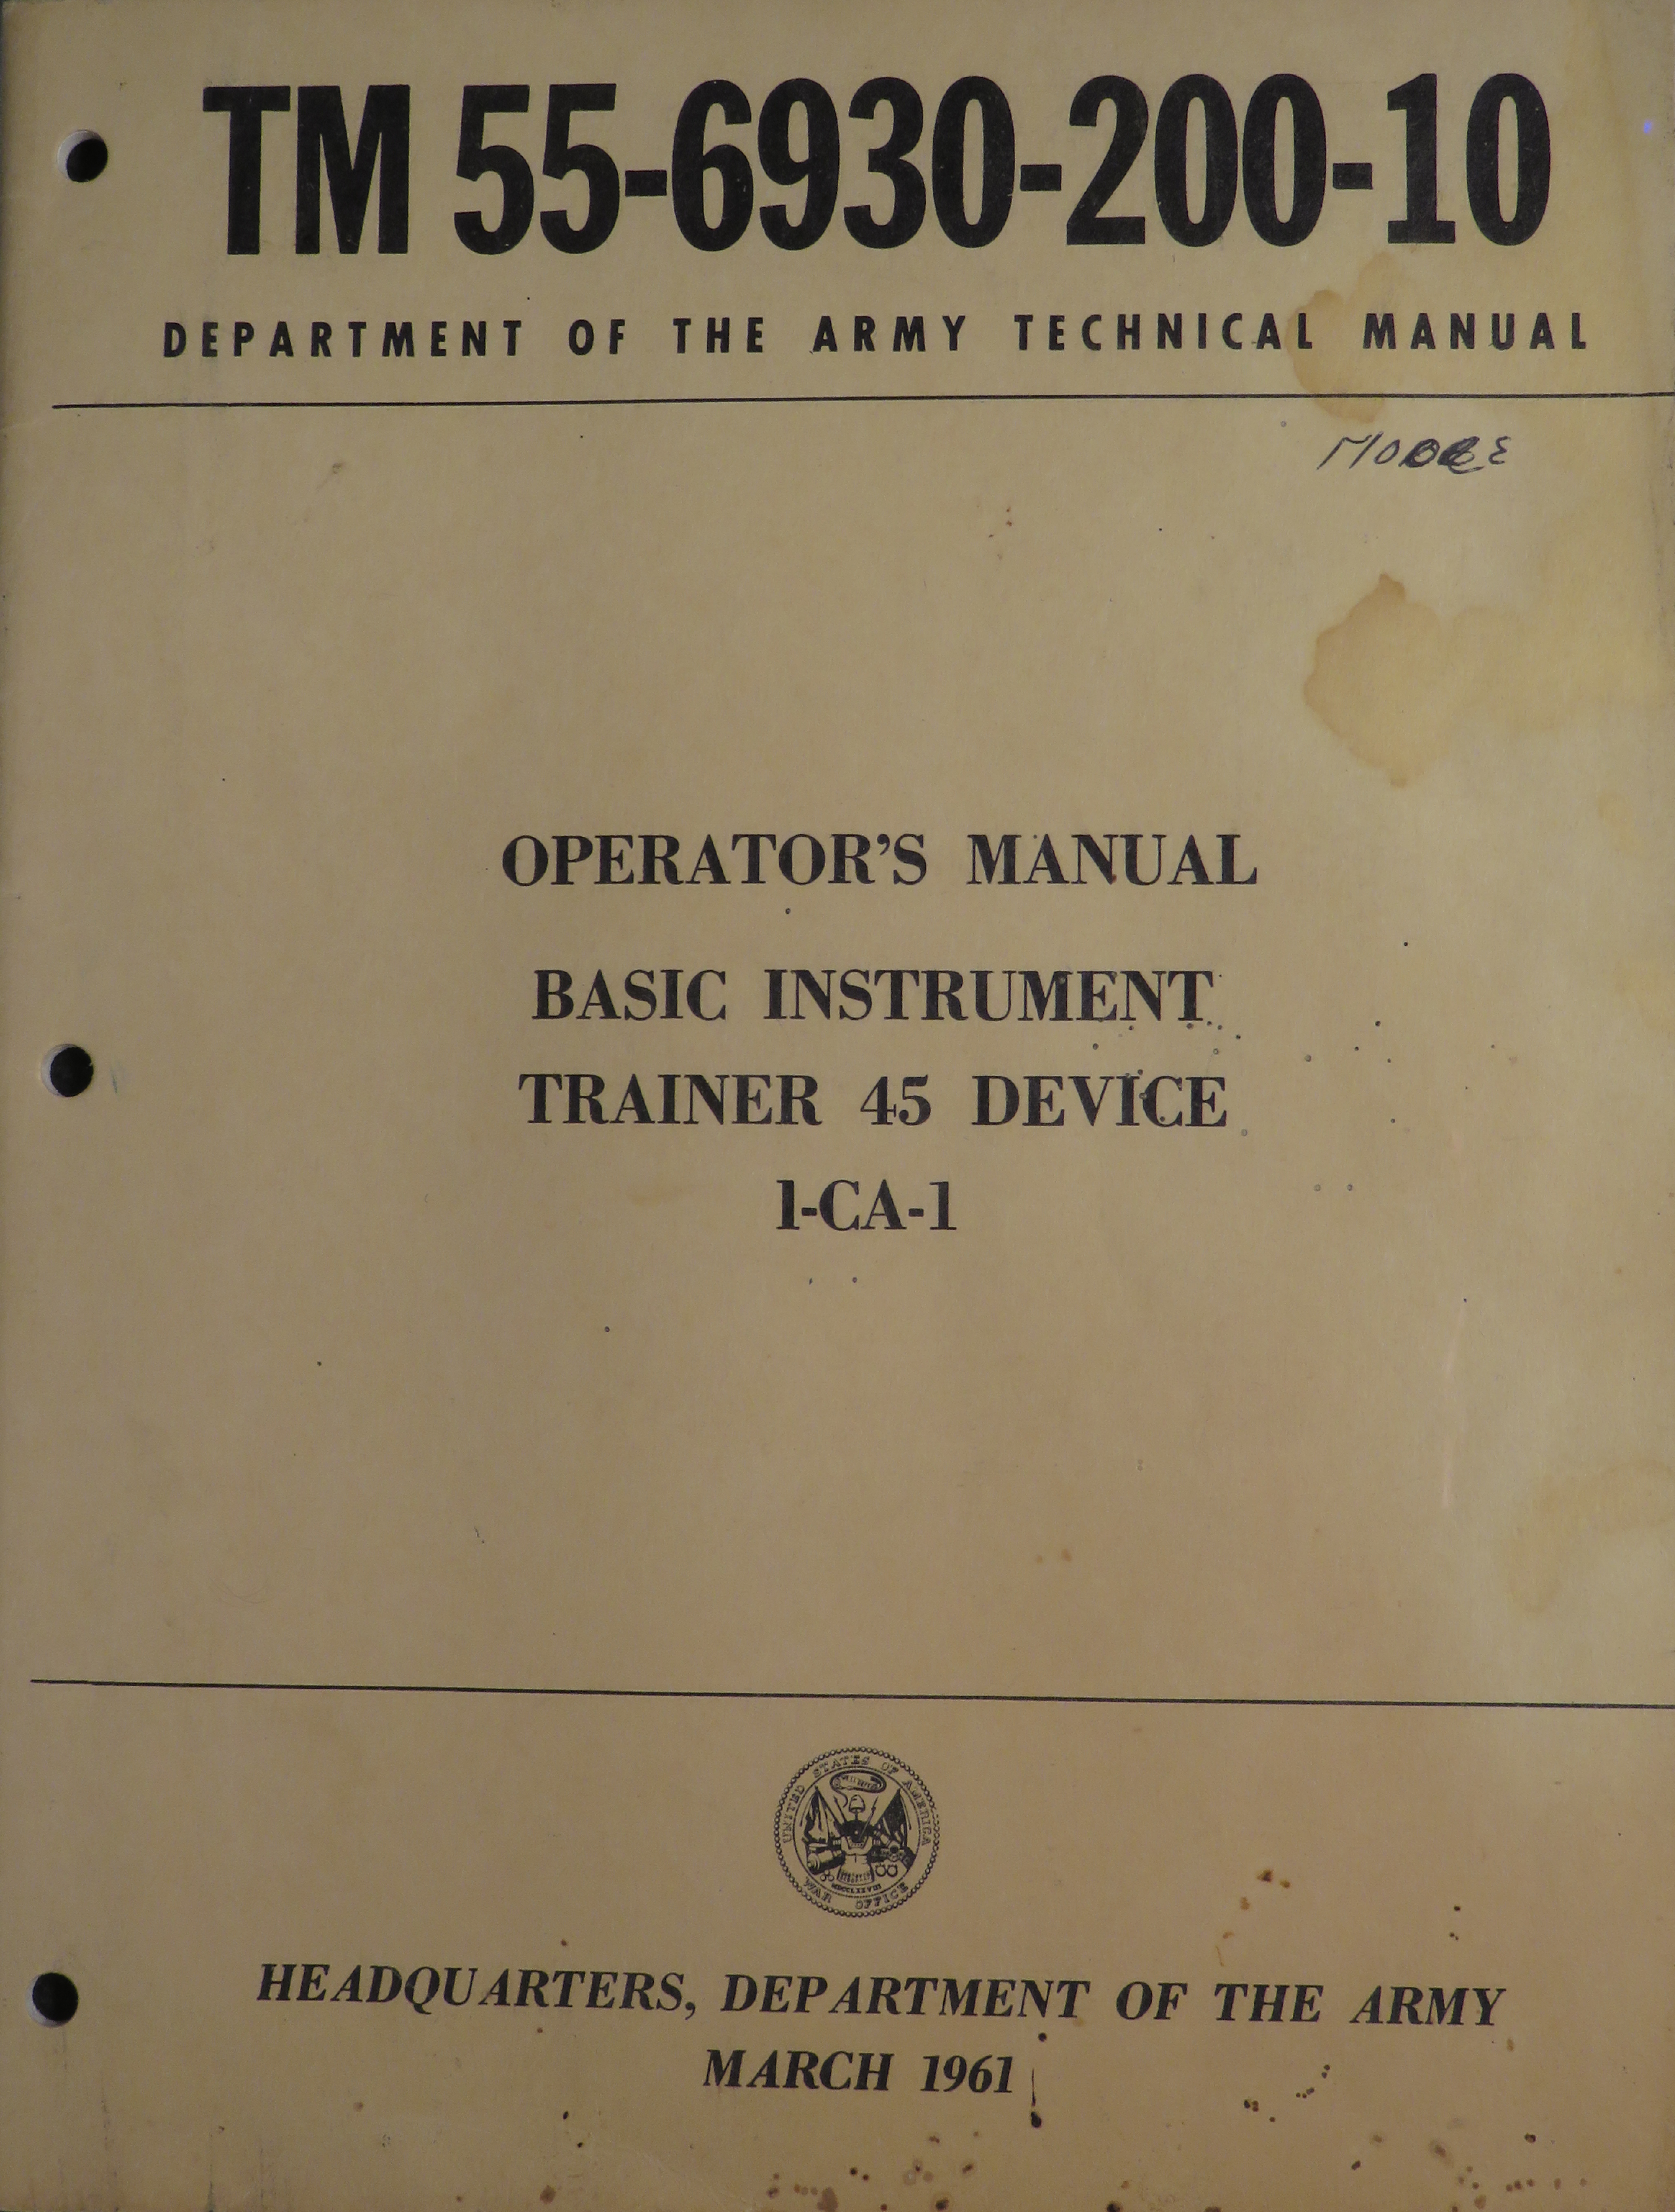 Sample page 1 from AirCorps Library document: Operator's Manual for Basic Instrument Trainer 45 Device 1-CA-1